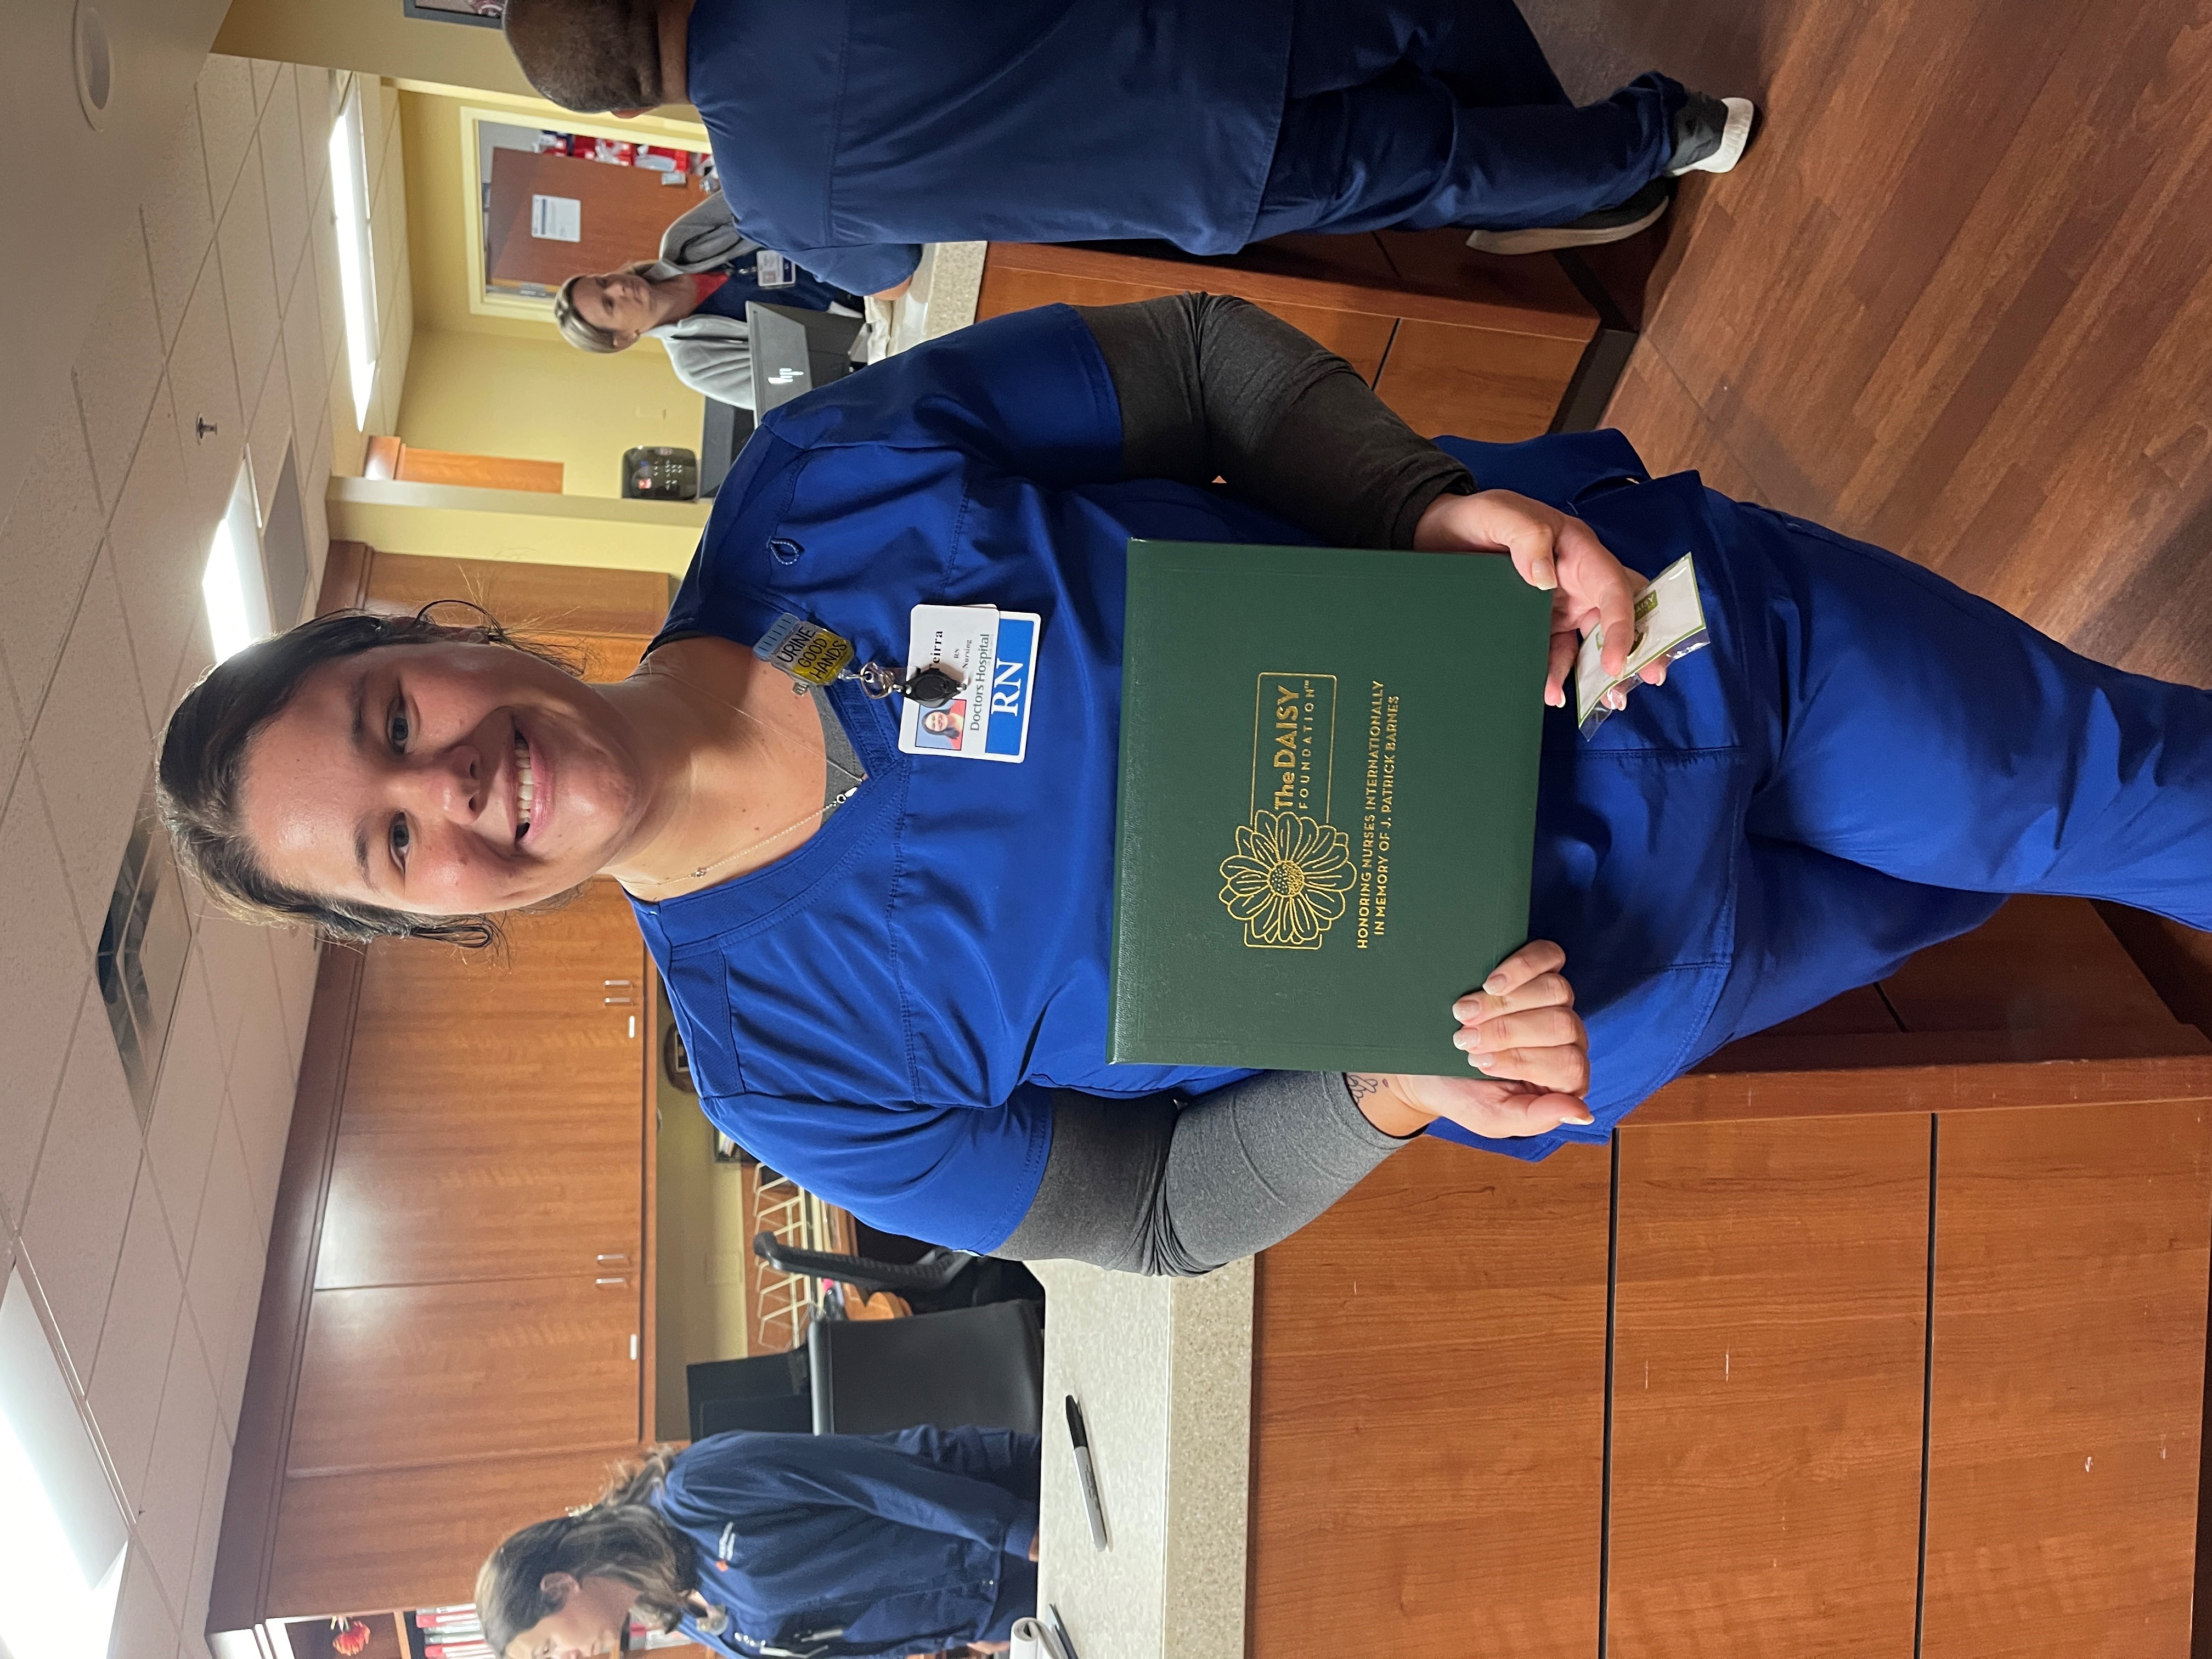 Nurse stands with award smiling